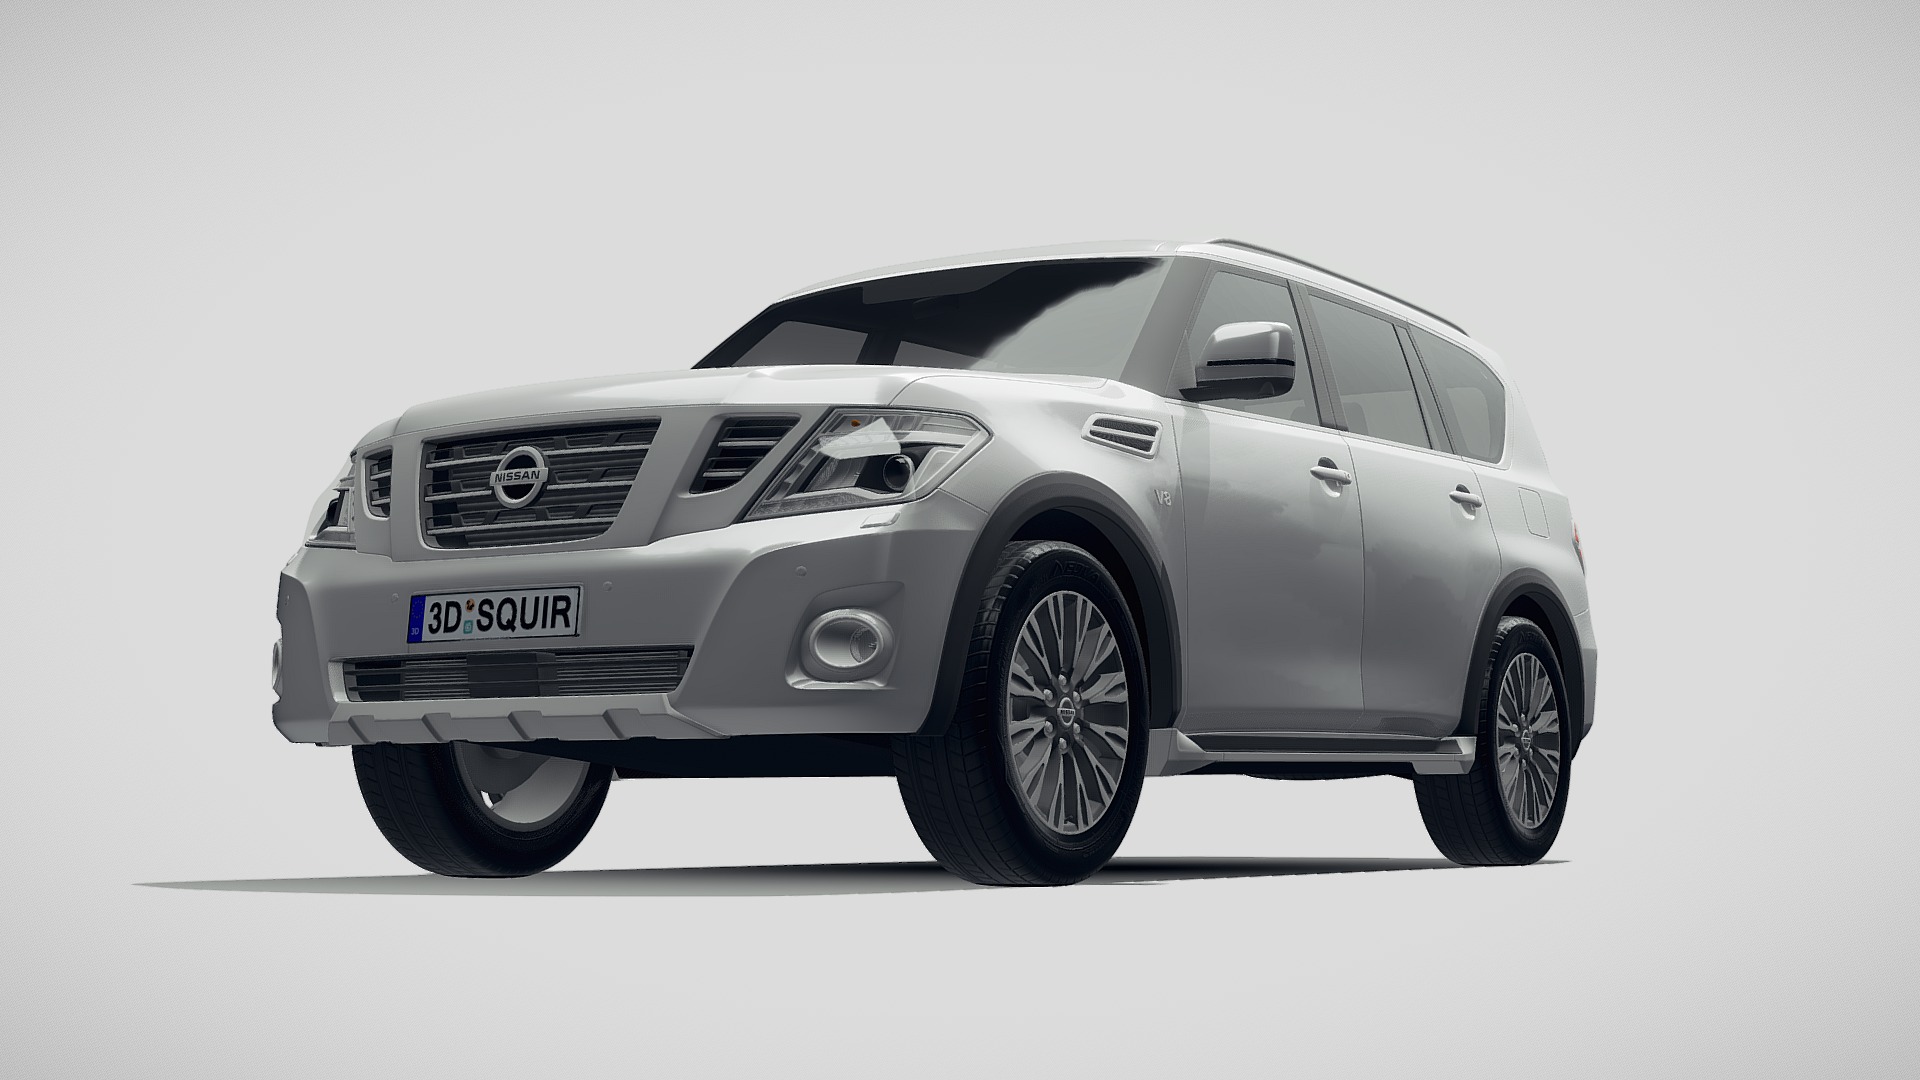 3D model Nissan Patrol Y62 2019 - This is a 3D model of the Nissan Patrol Y62 2019. The 3D model is about a silver car with a black roof.